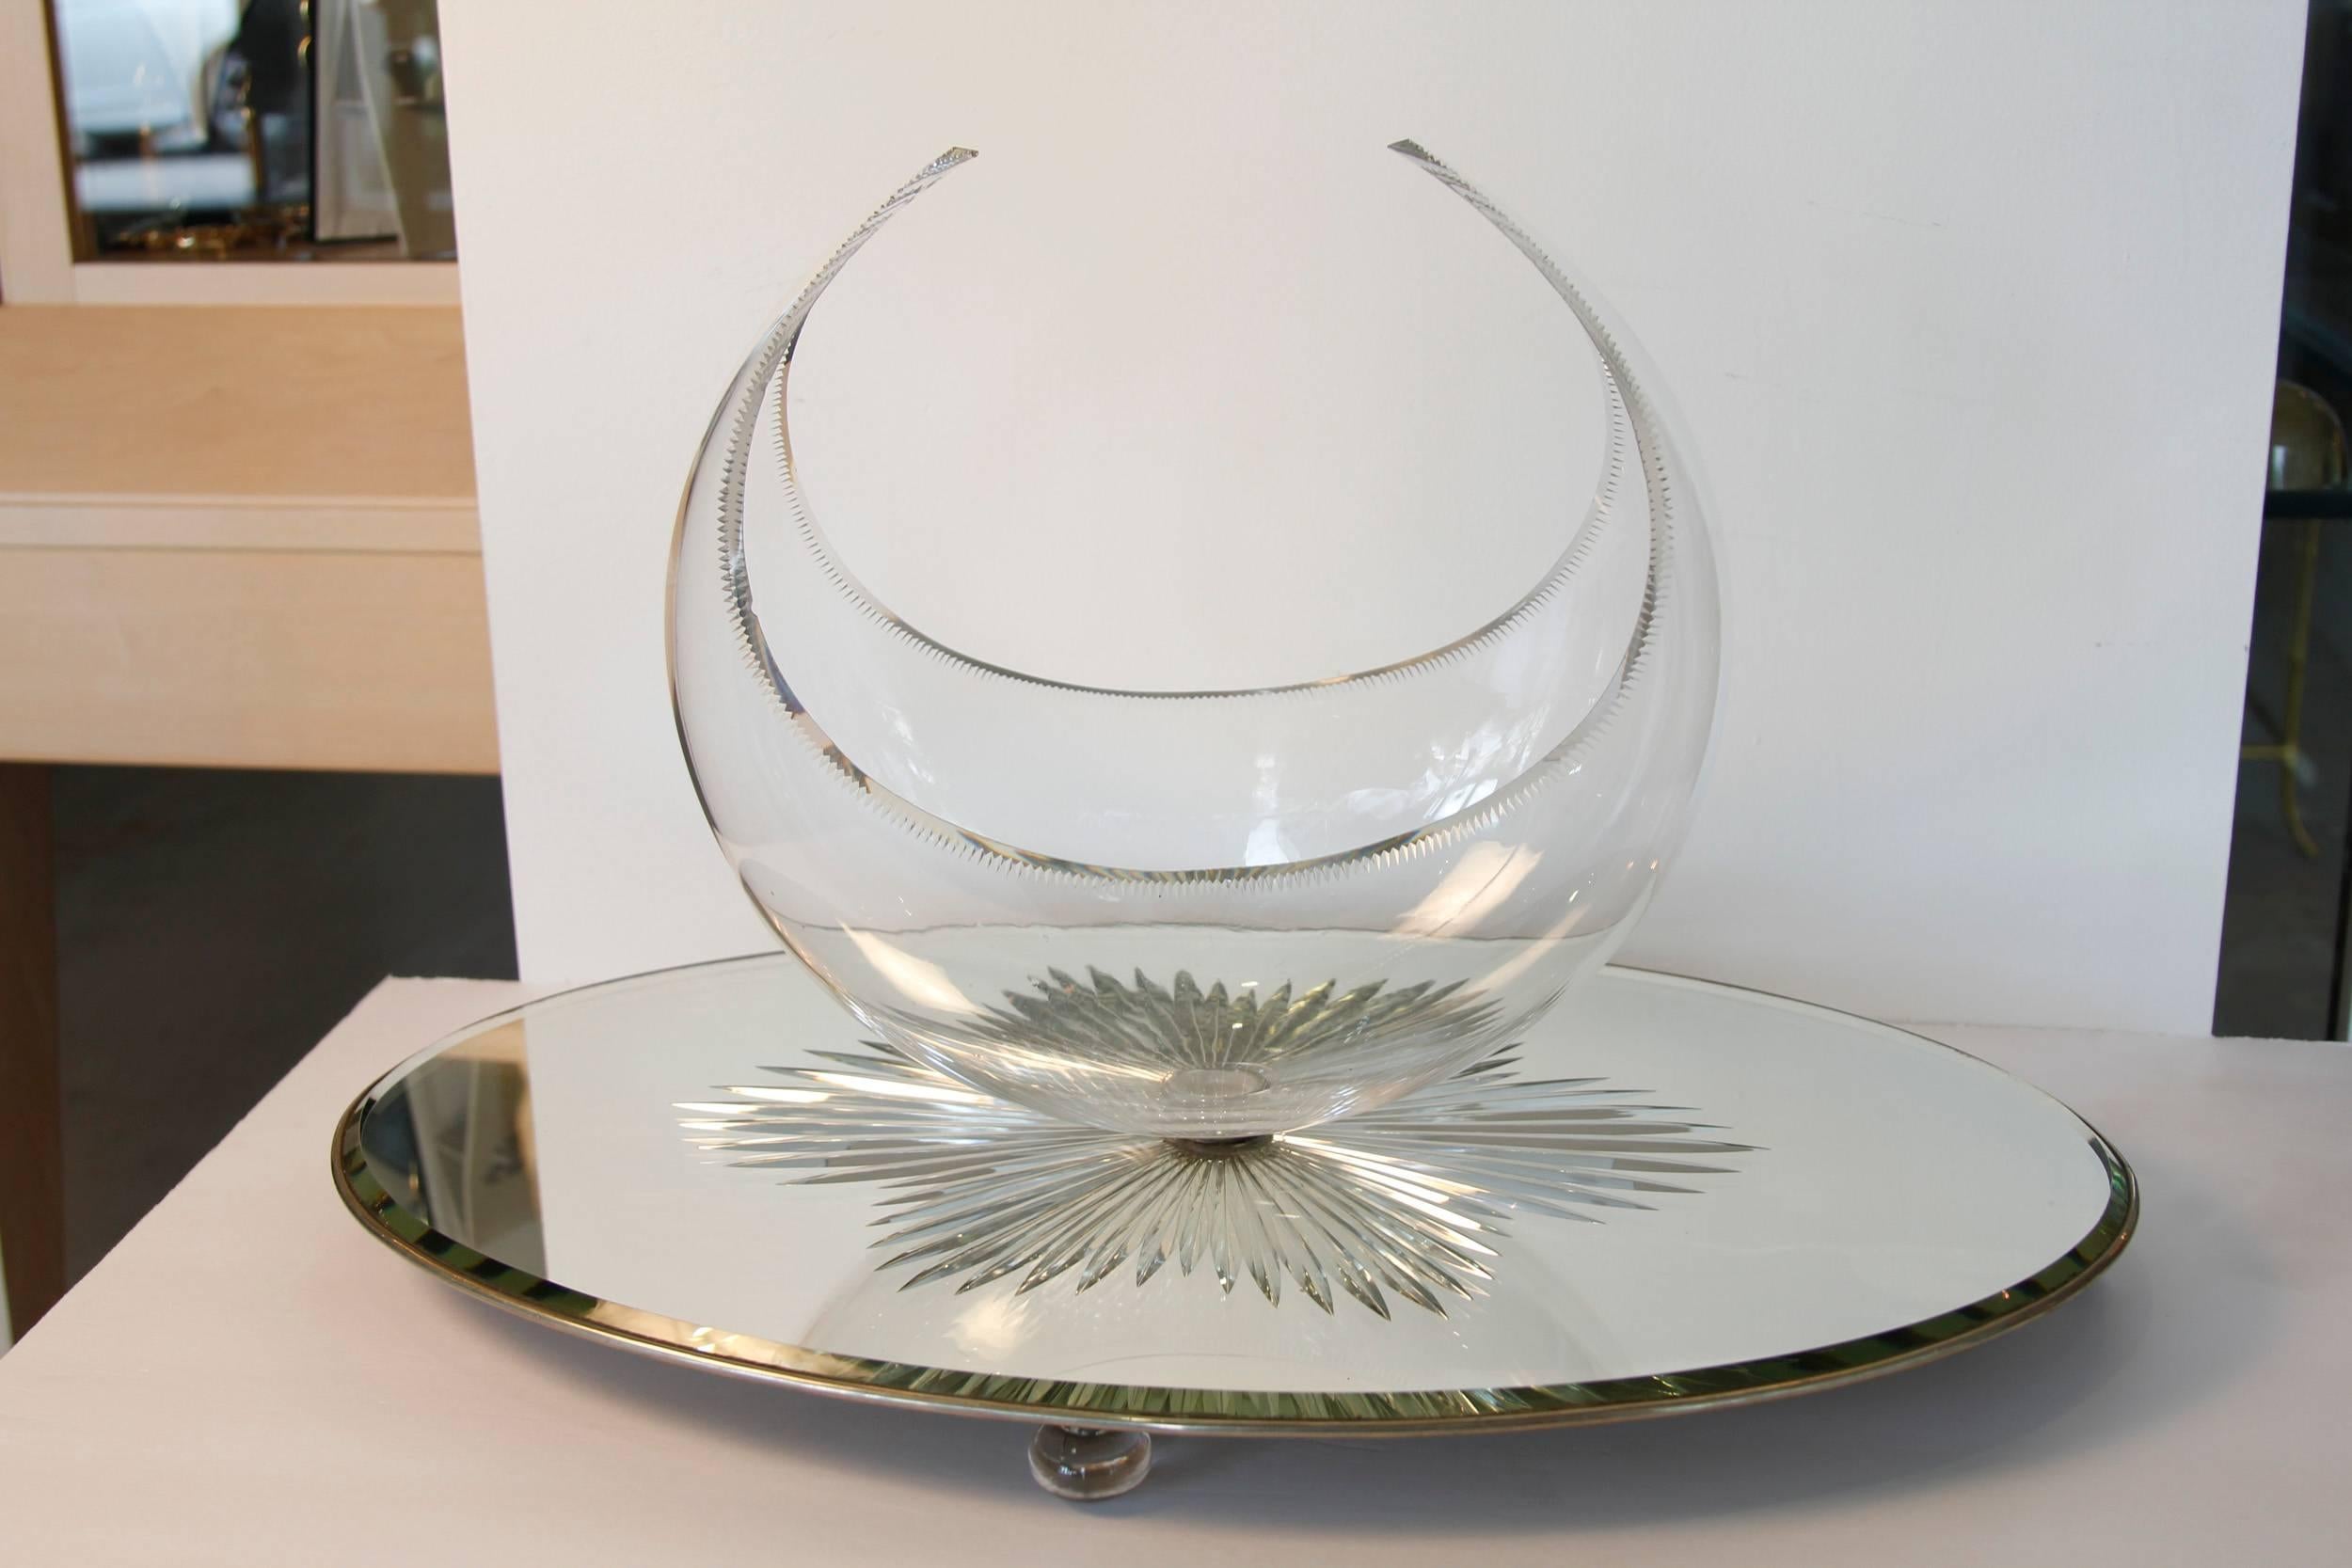 Striking Art Deco tabletop centrepiece with swooping central bowl mounted on cut mirror plateau.